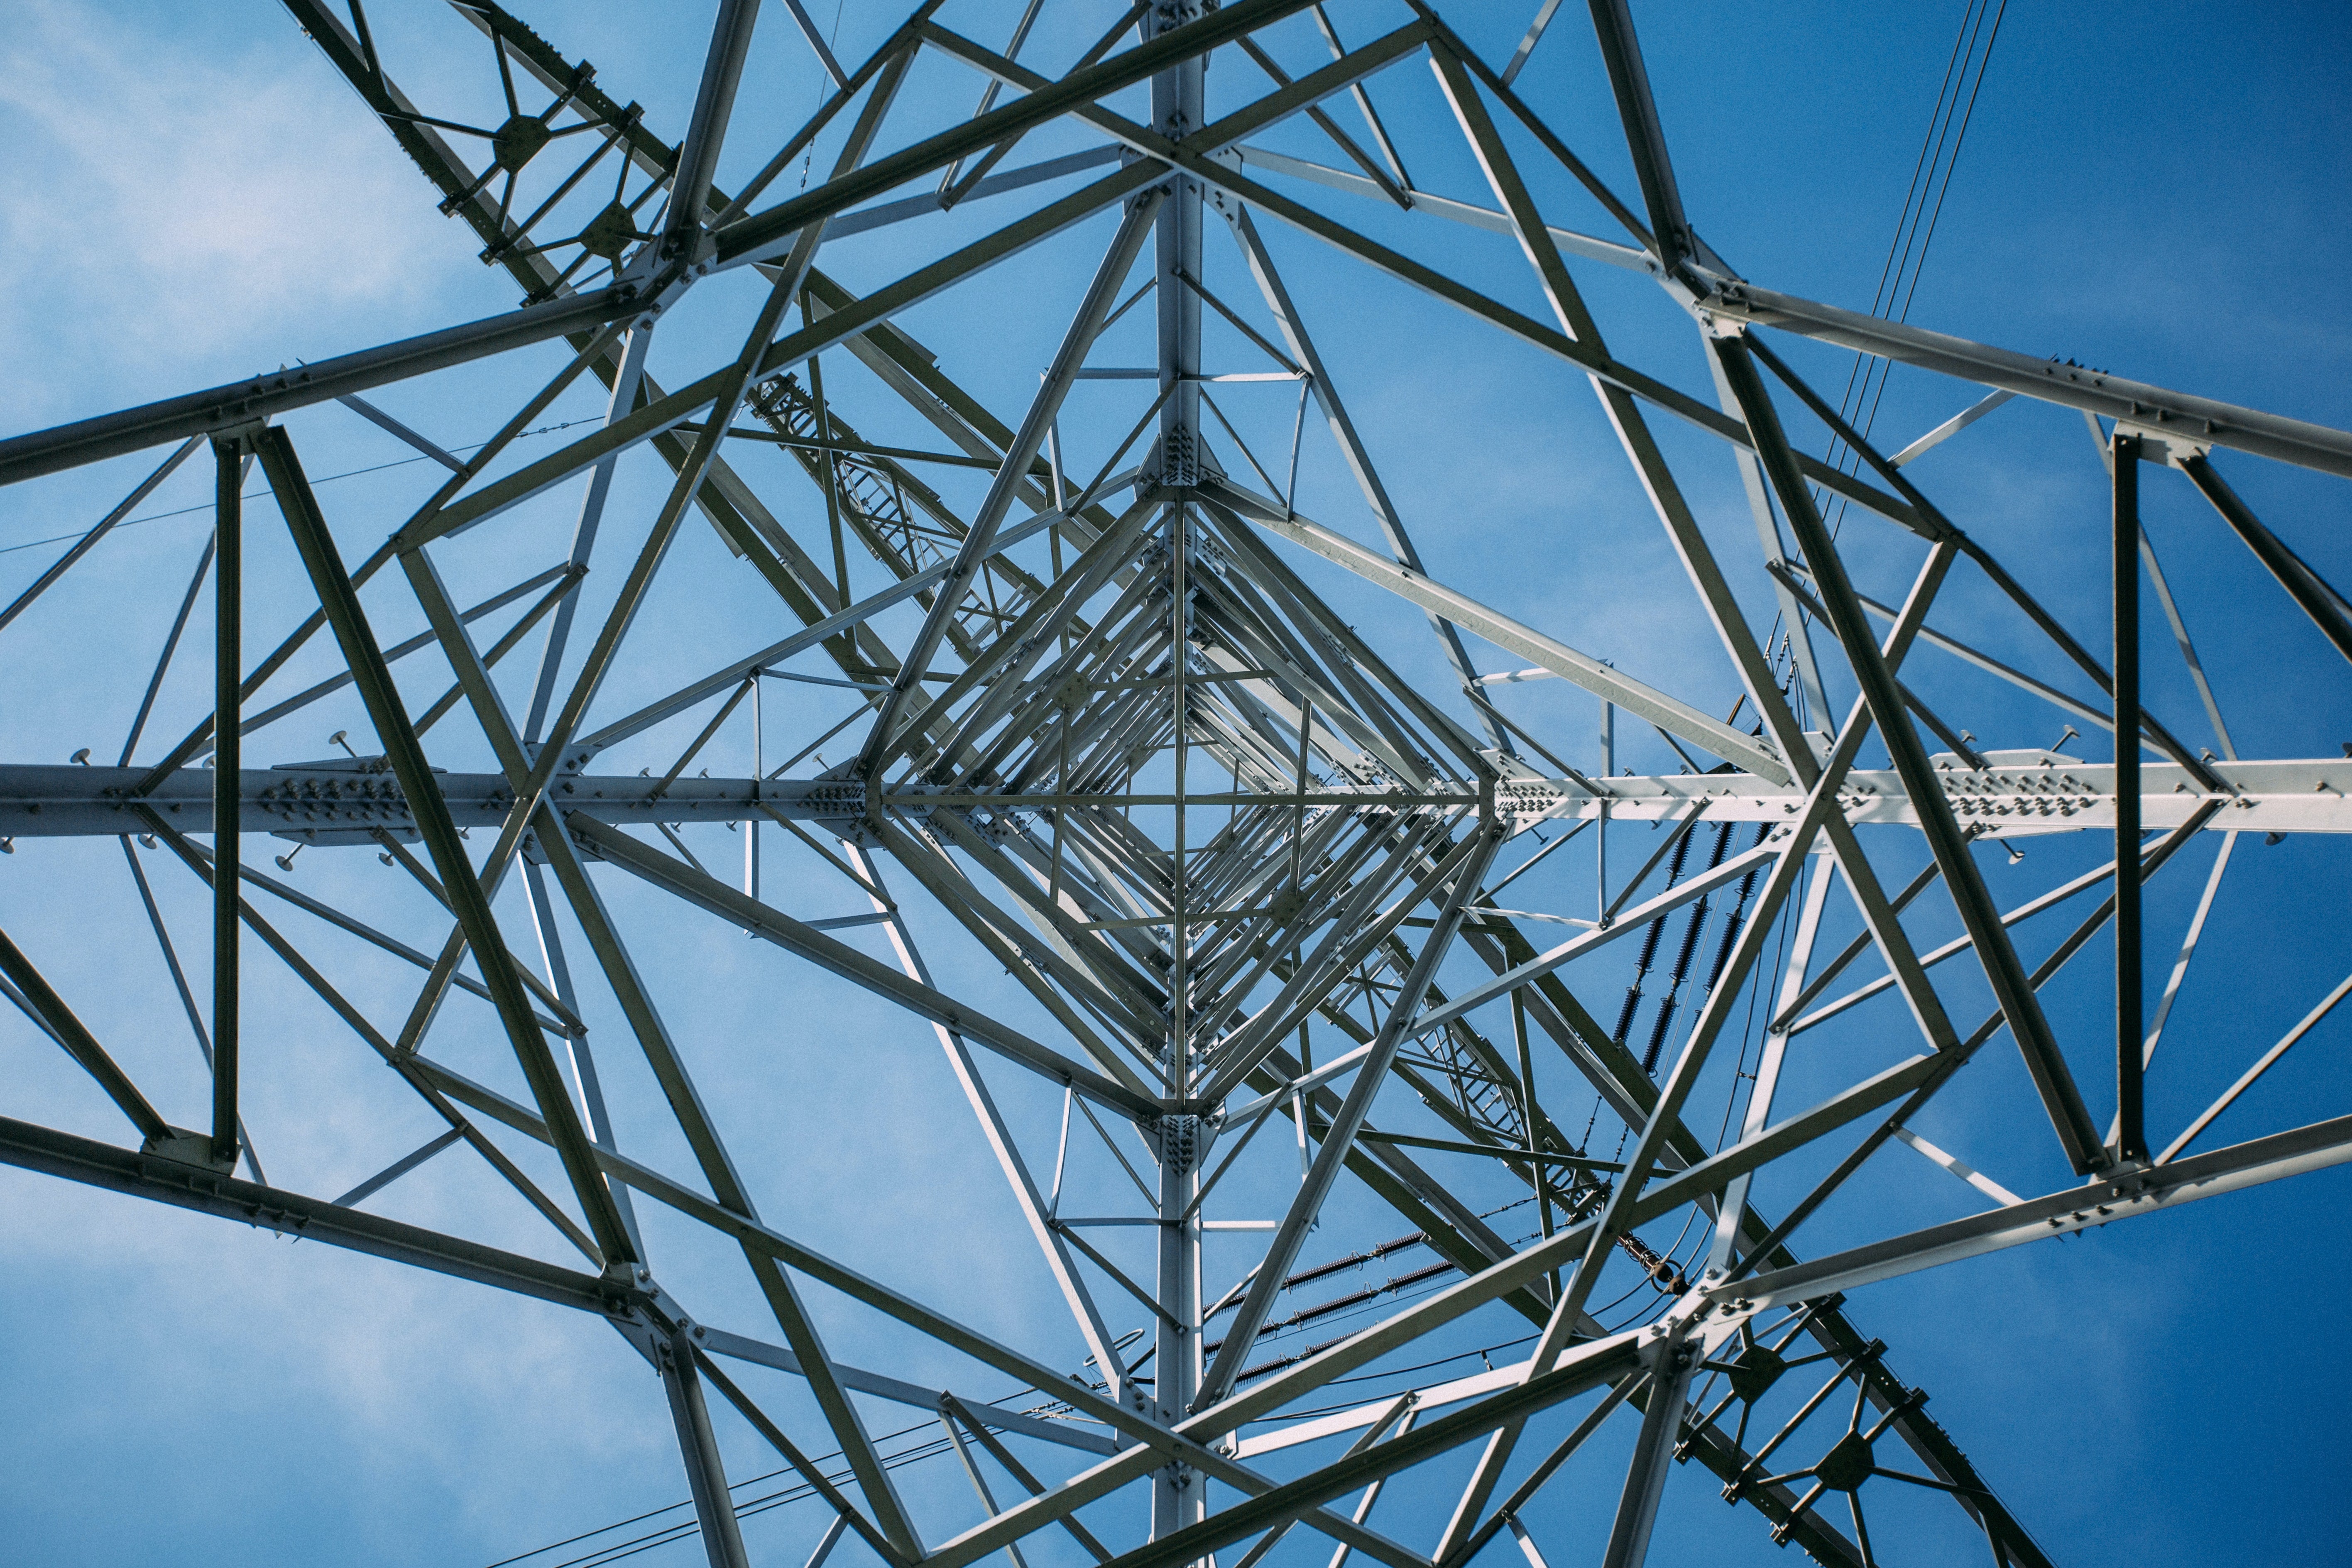 A low-angle view of a transmission tower.